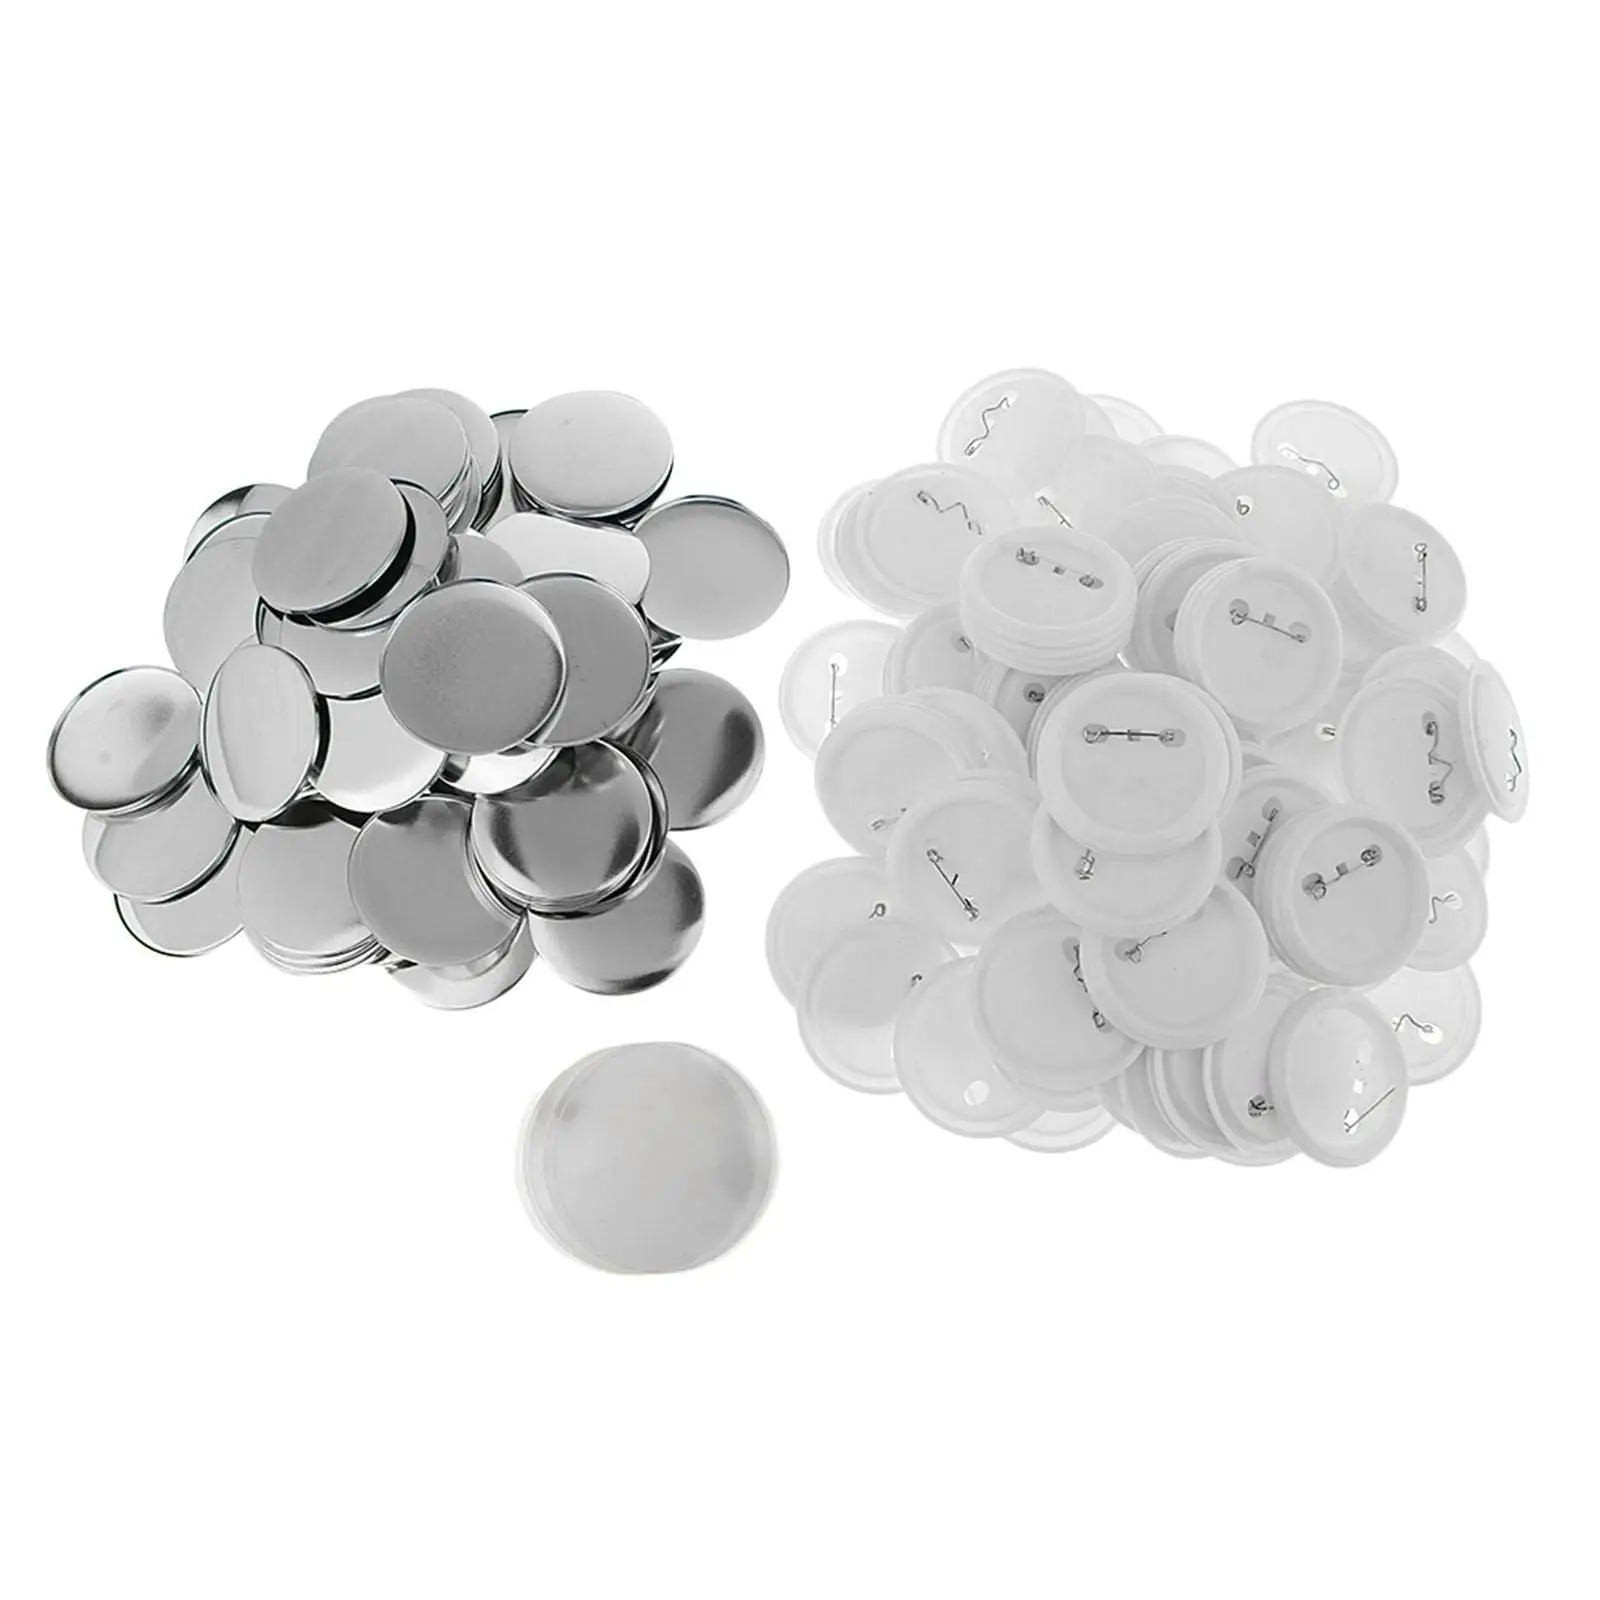 Blank Button Making Supplies Round Pin Button Badge Parts for Button Maker Machine Presents with Metal Cover, Base, Film